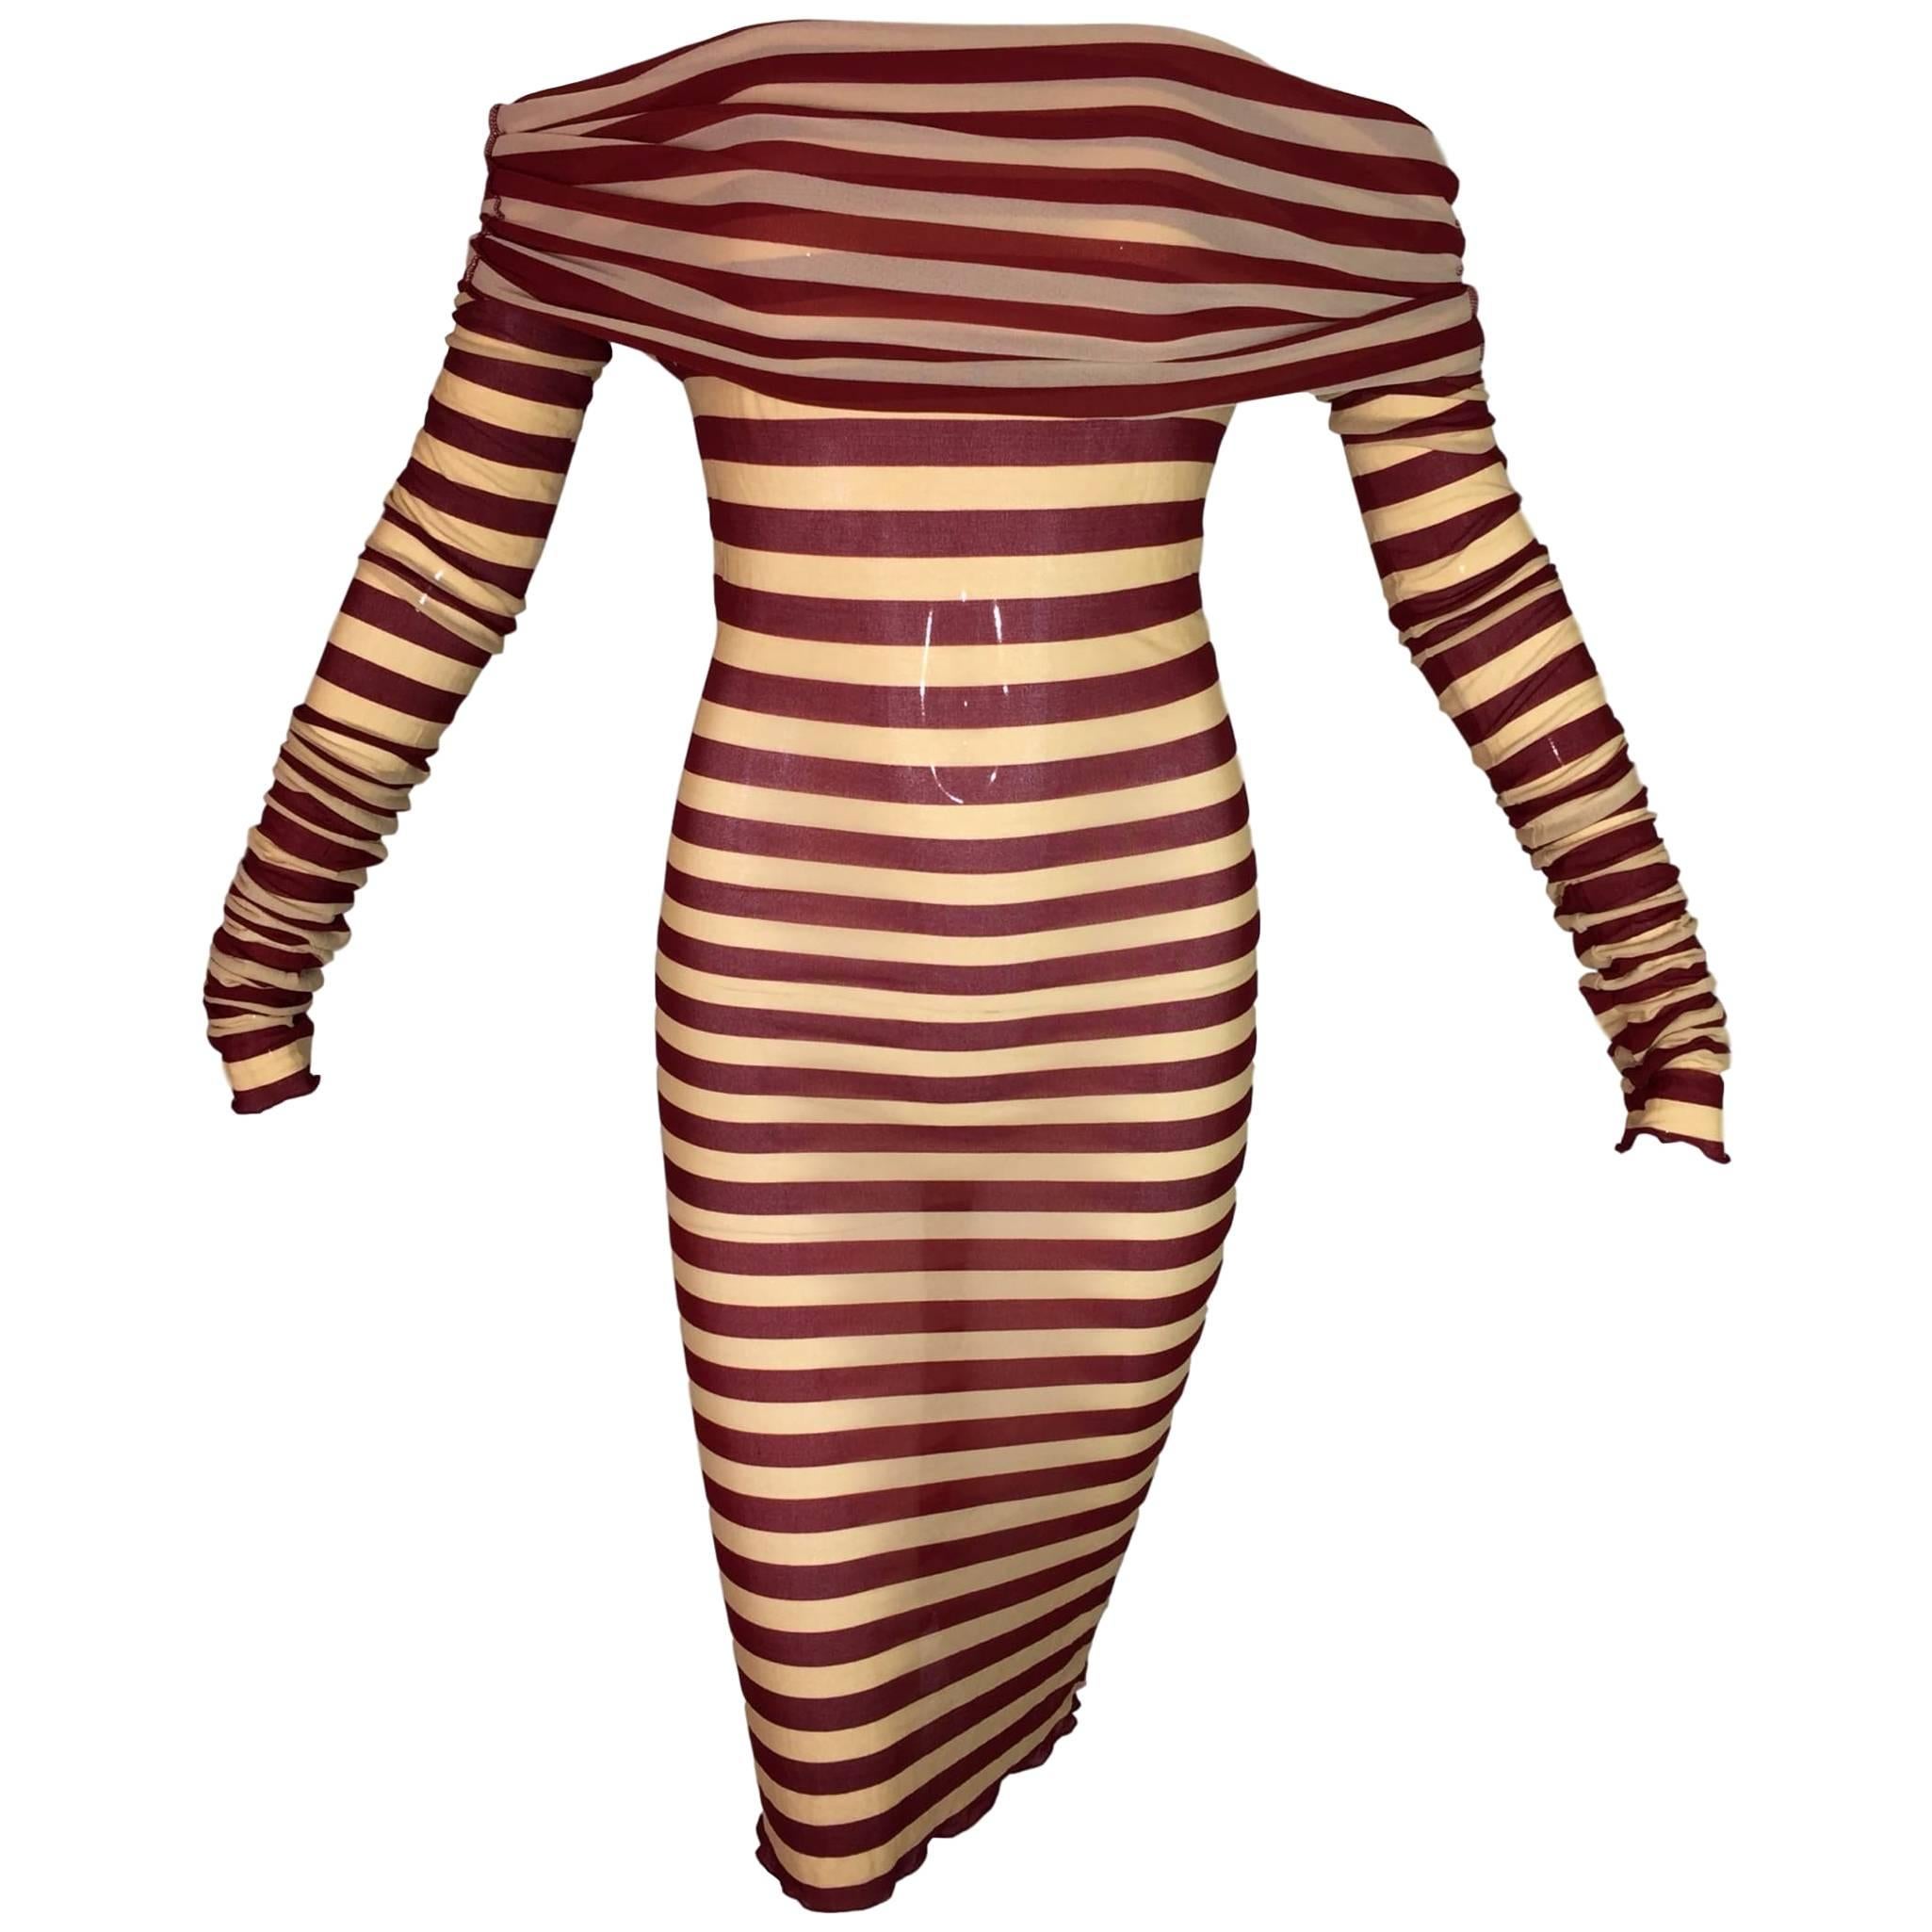 Jean Paul Gaultier Nude and Red Striped Sheer Mesh Off Shoulder Dress, S/S 2003 